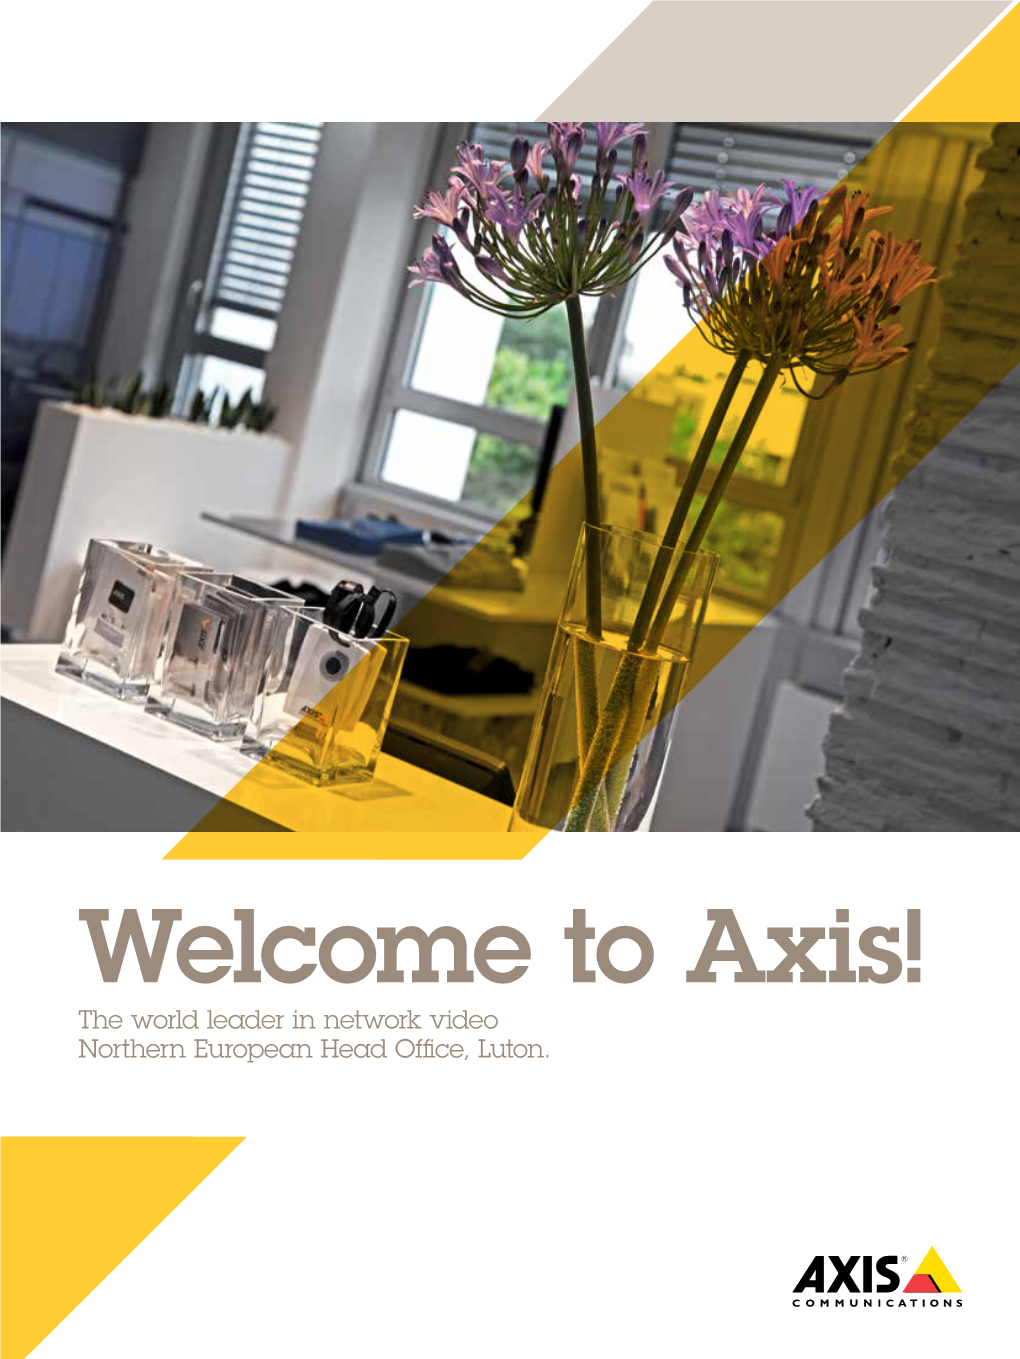 Welcome to Axis! the World Leader in Network Video Northern European Head Office, Luton